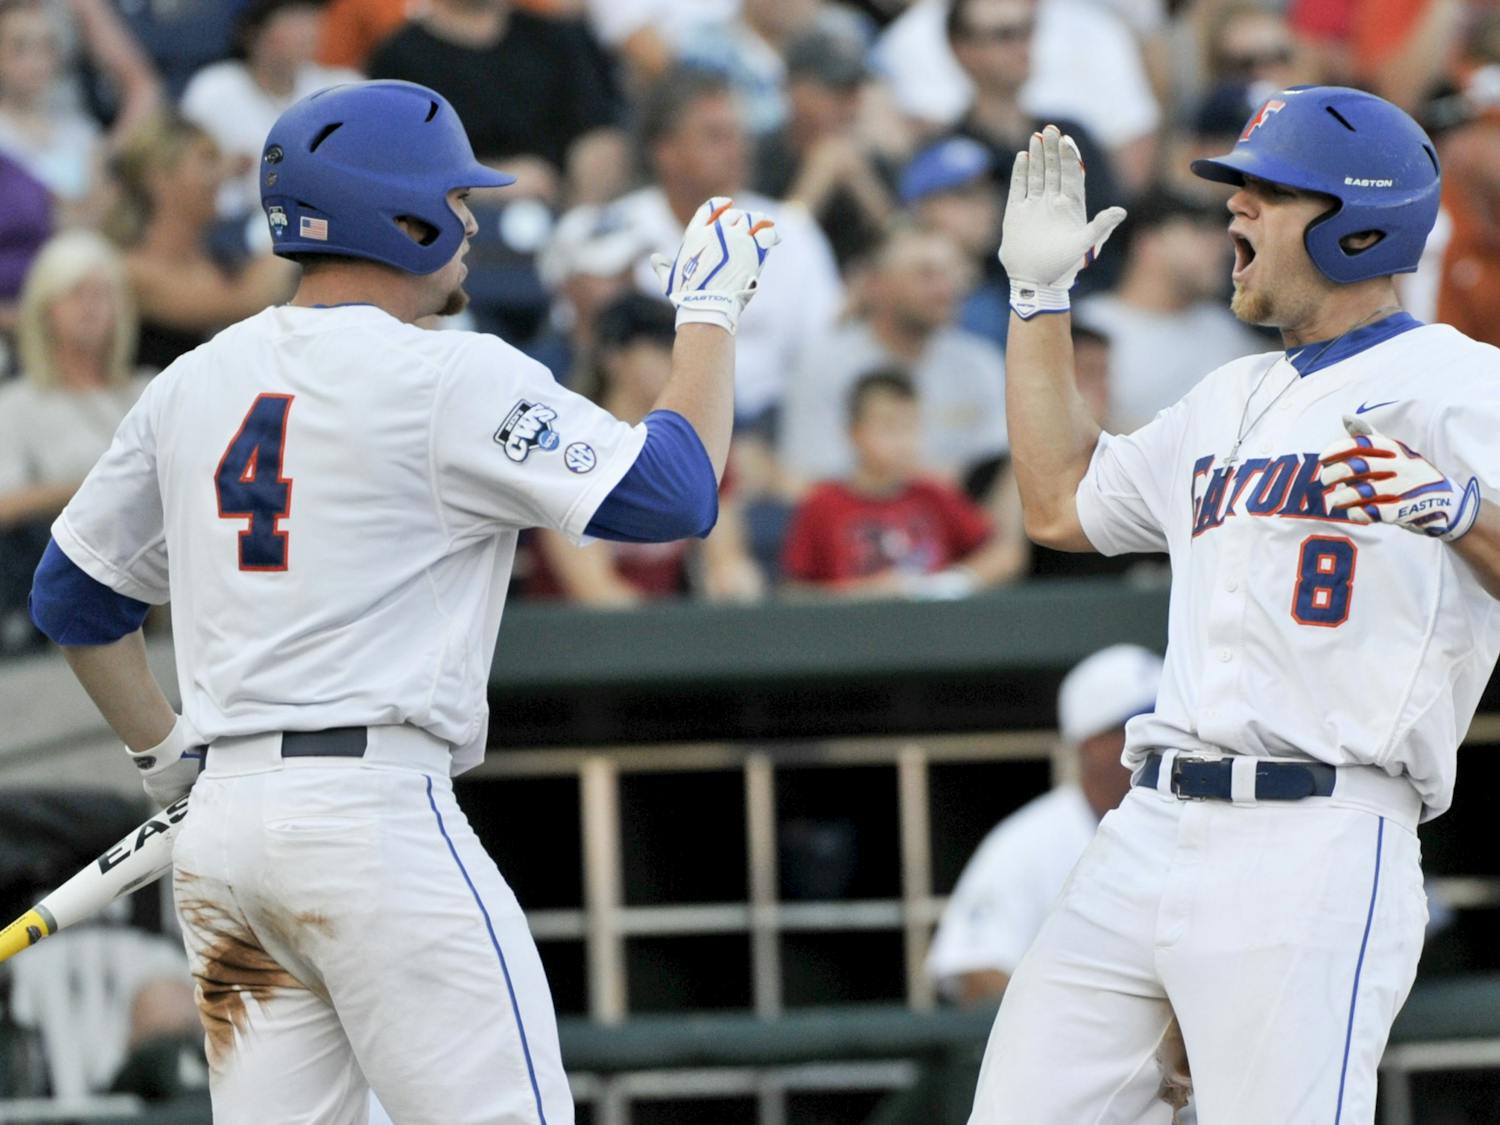 No. 2 national seed Florida seed defeated Texas 8-4 in Saturday's College World Series opener in Omaha, Neb. The Gators will now play Vanderbilt on Tuesday.